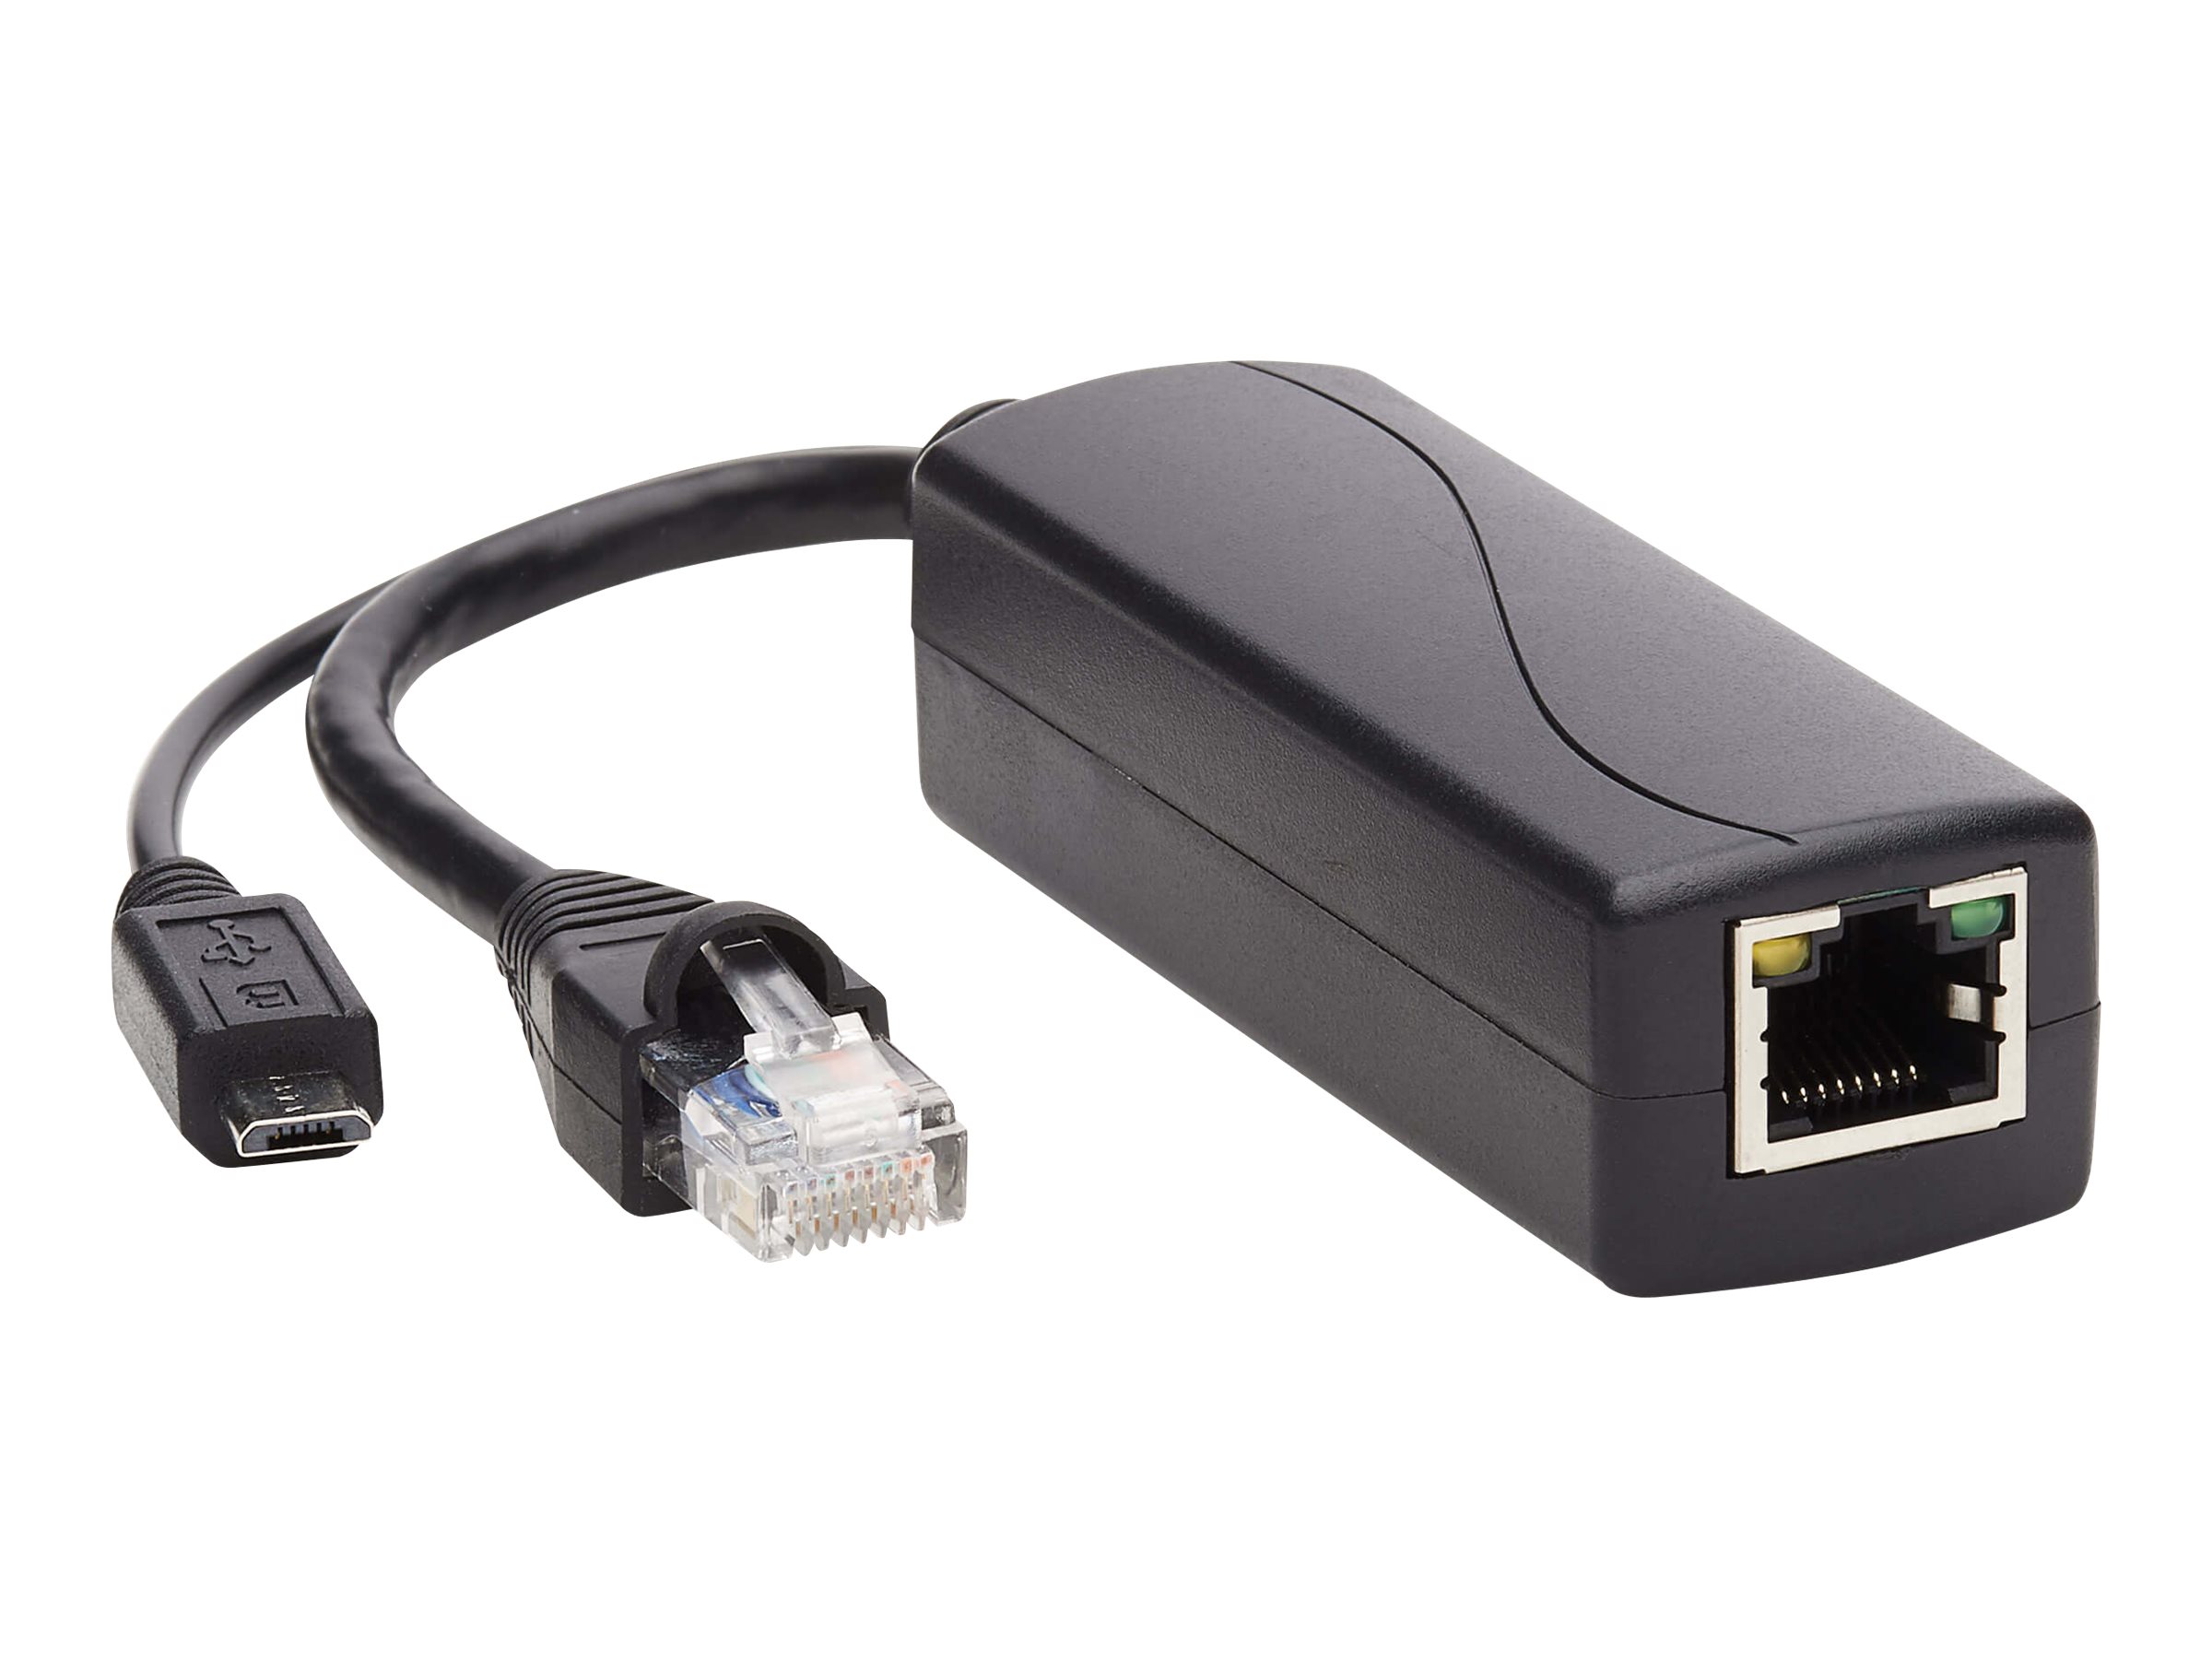 Tripp Lite PoE to USB Micro-B and RJ45 Active Splitter - 802.af, 48V to 5V 1A, Up to 328 ft. (100 m) - PoE-Splitter - 1 A - DC 4